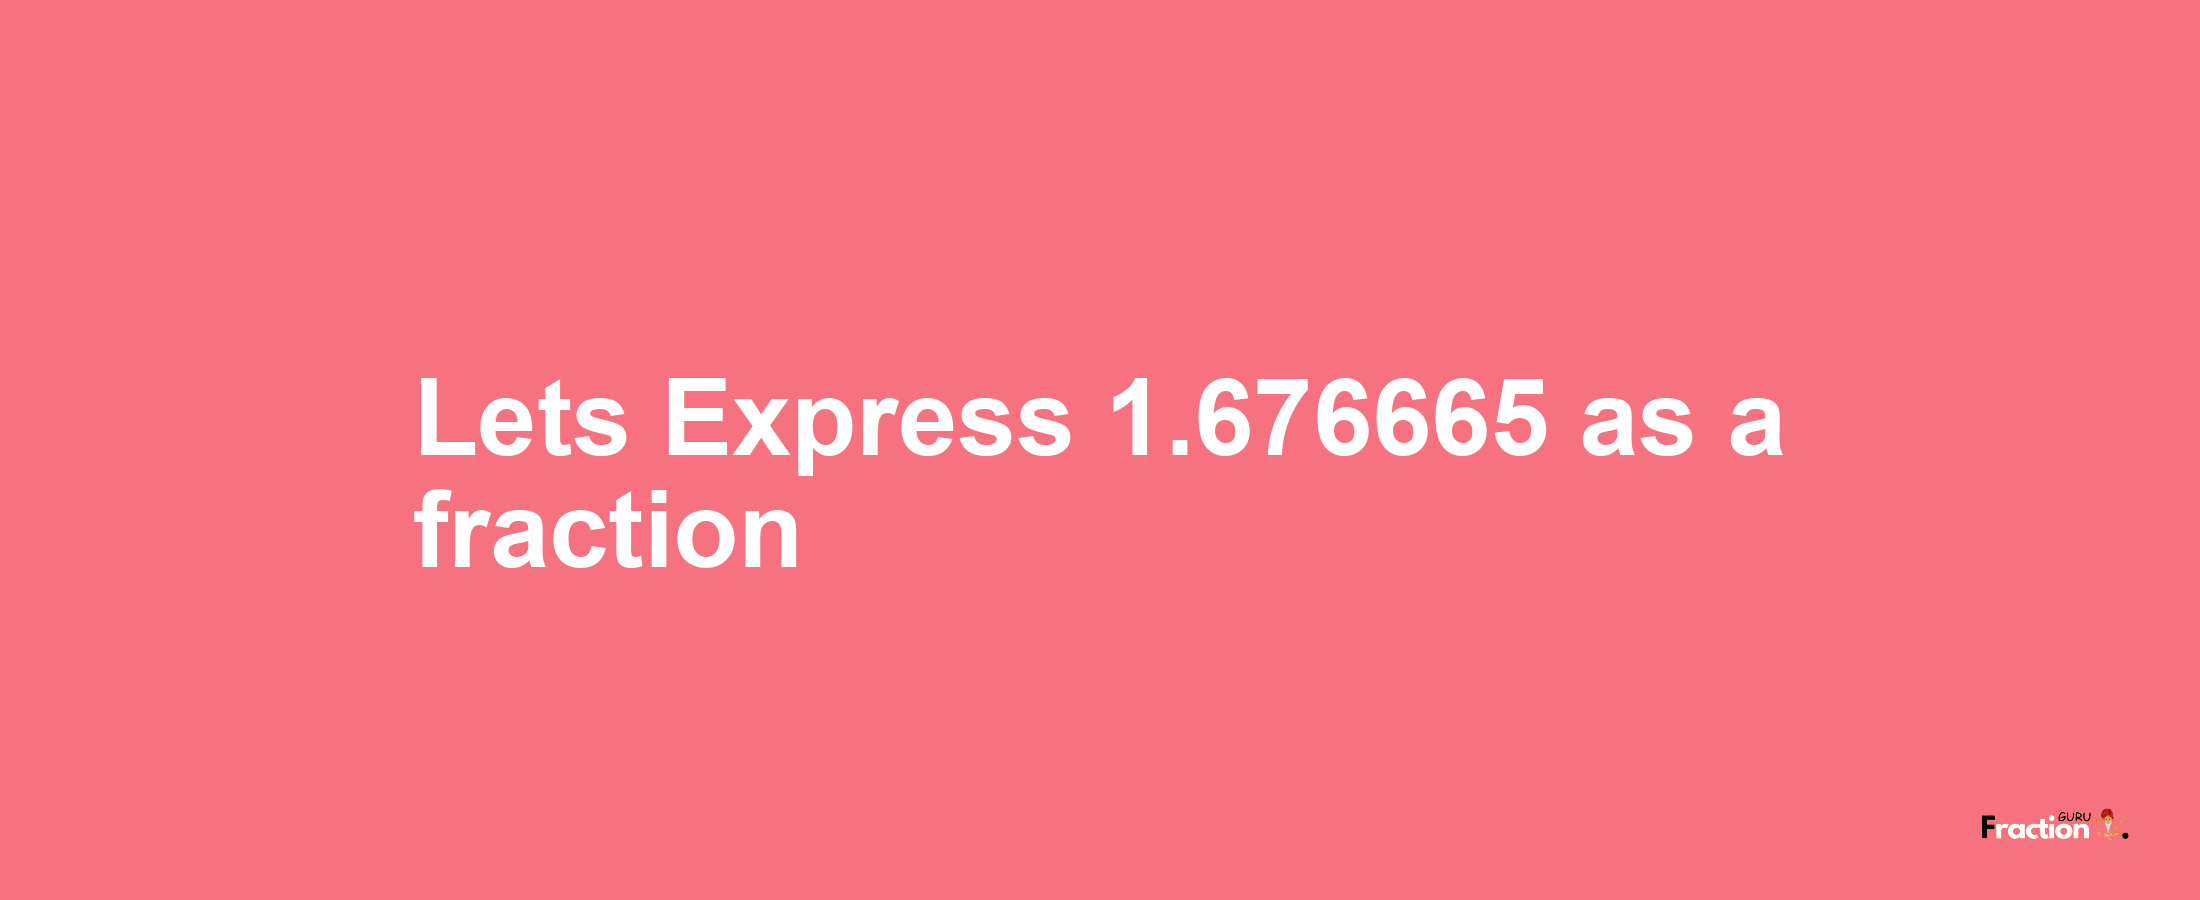 Lets Express 1.676665 as afraction